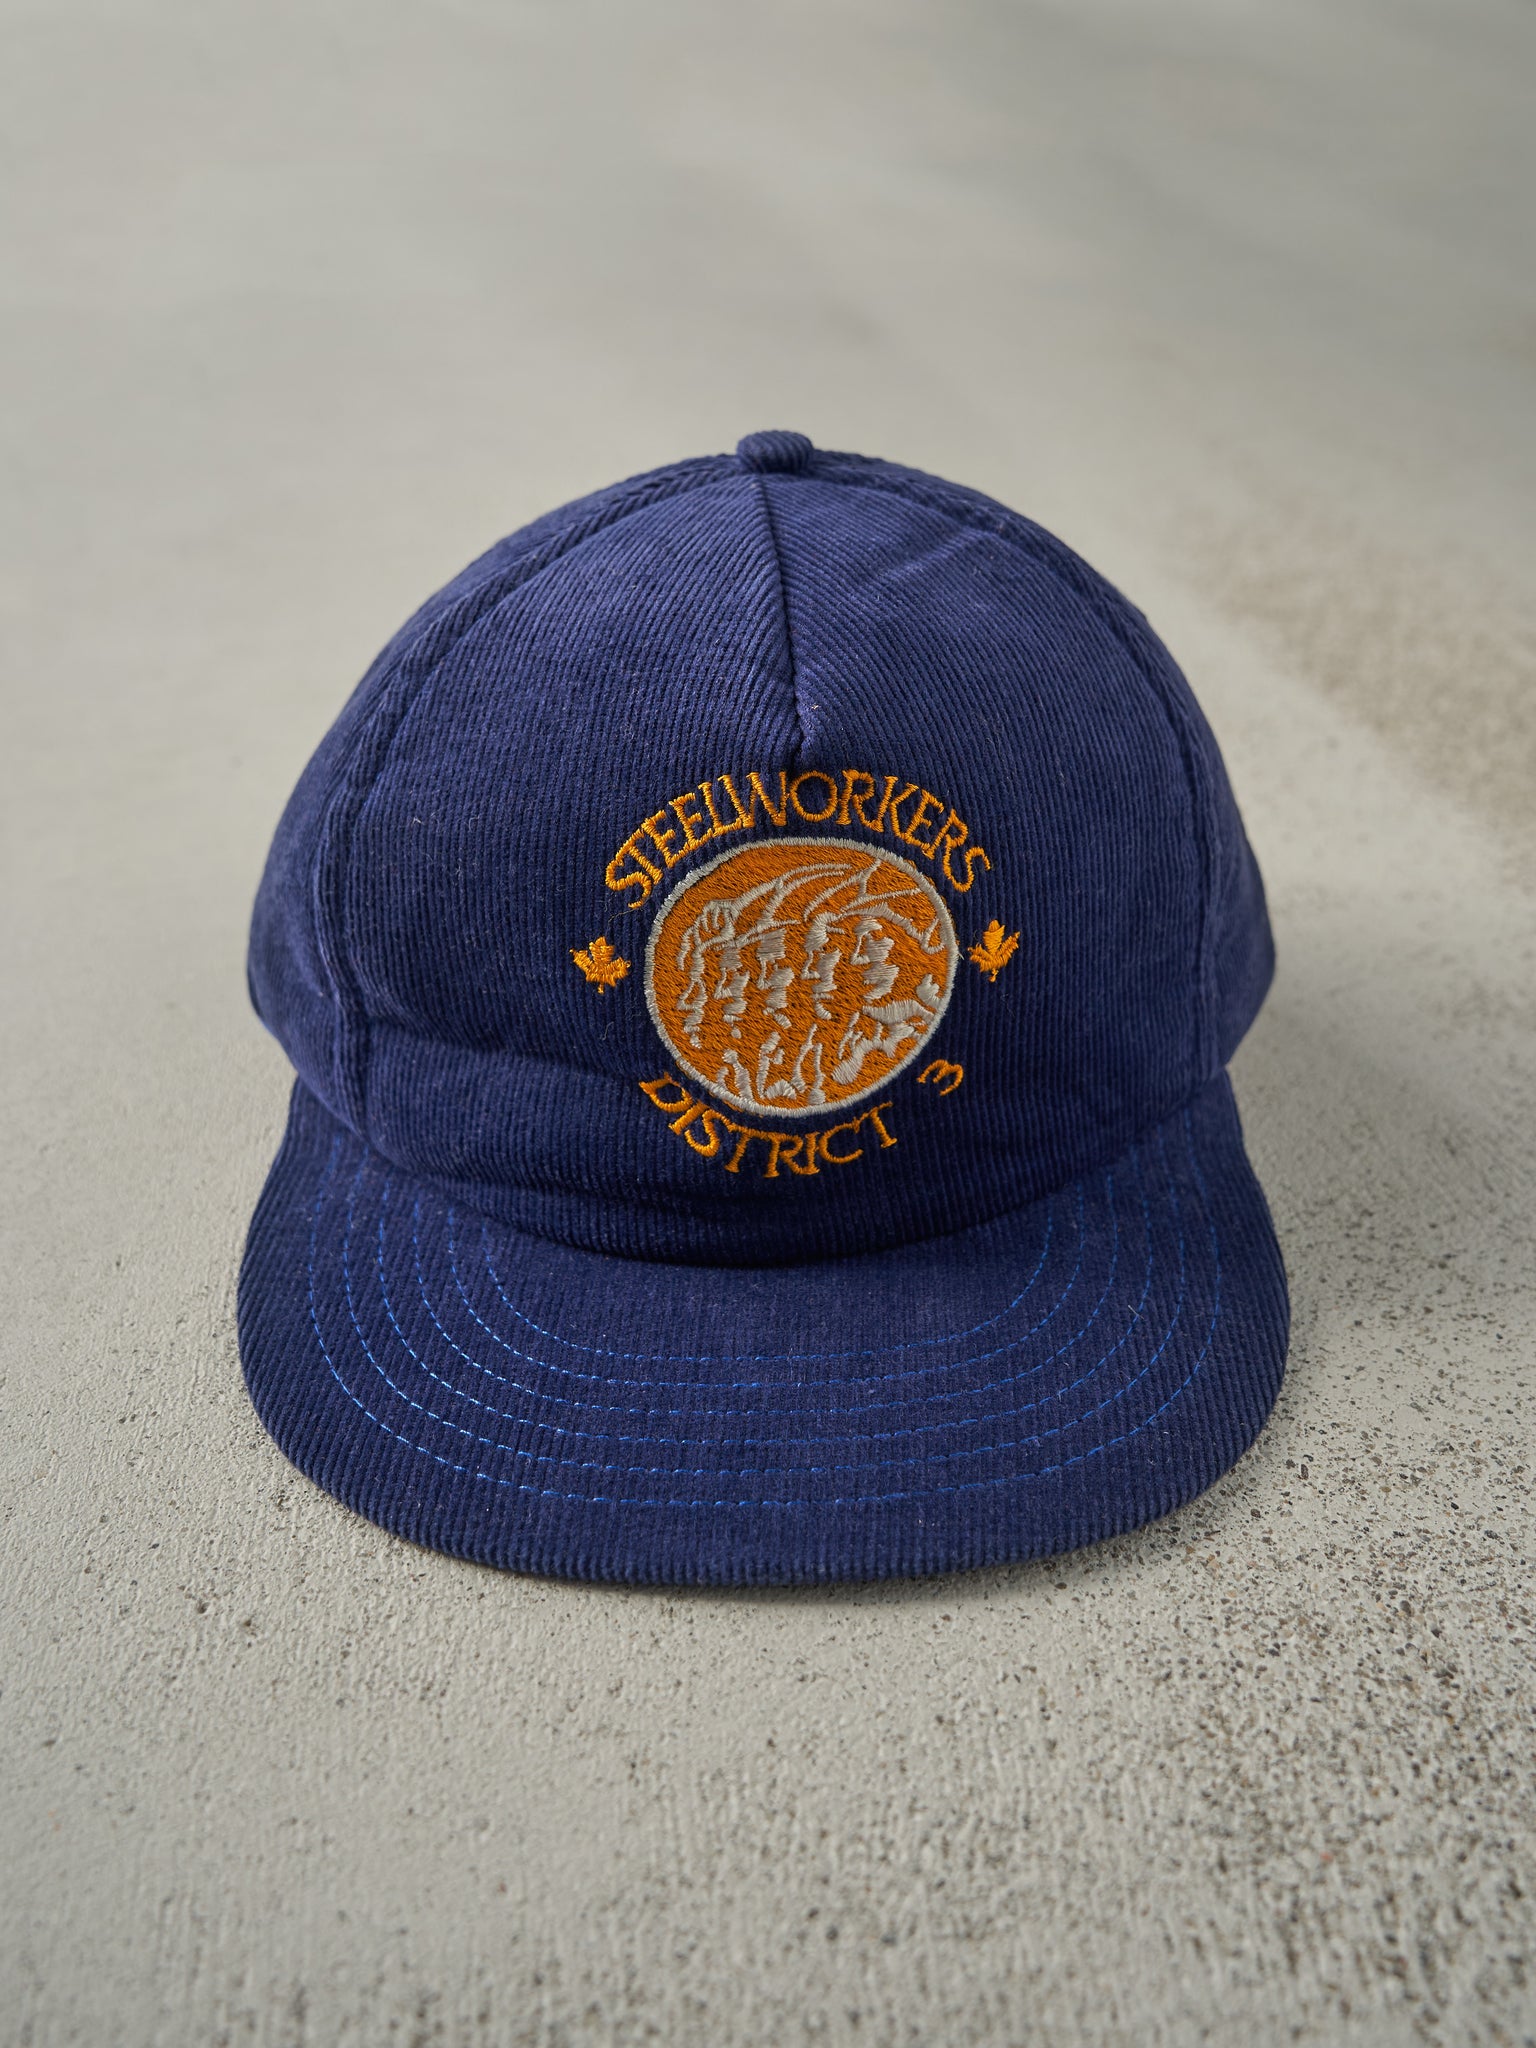 Vintage 80s Navy Blue Embroidered SteelWorkers Corduroy Foam Snapback Hat